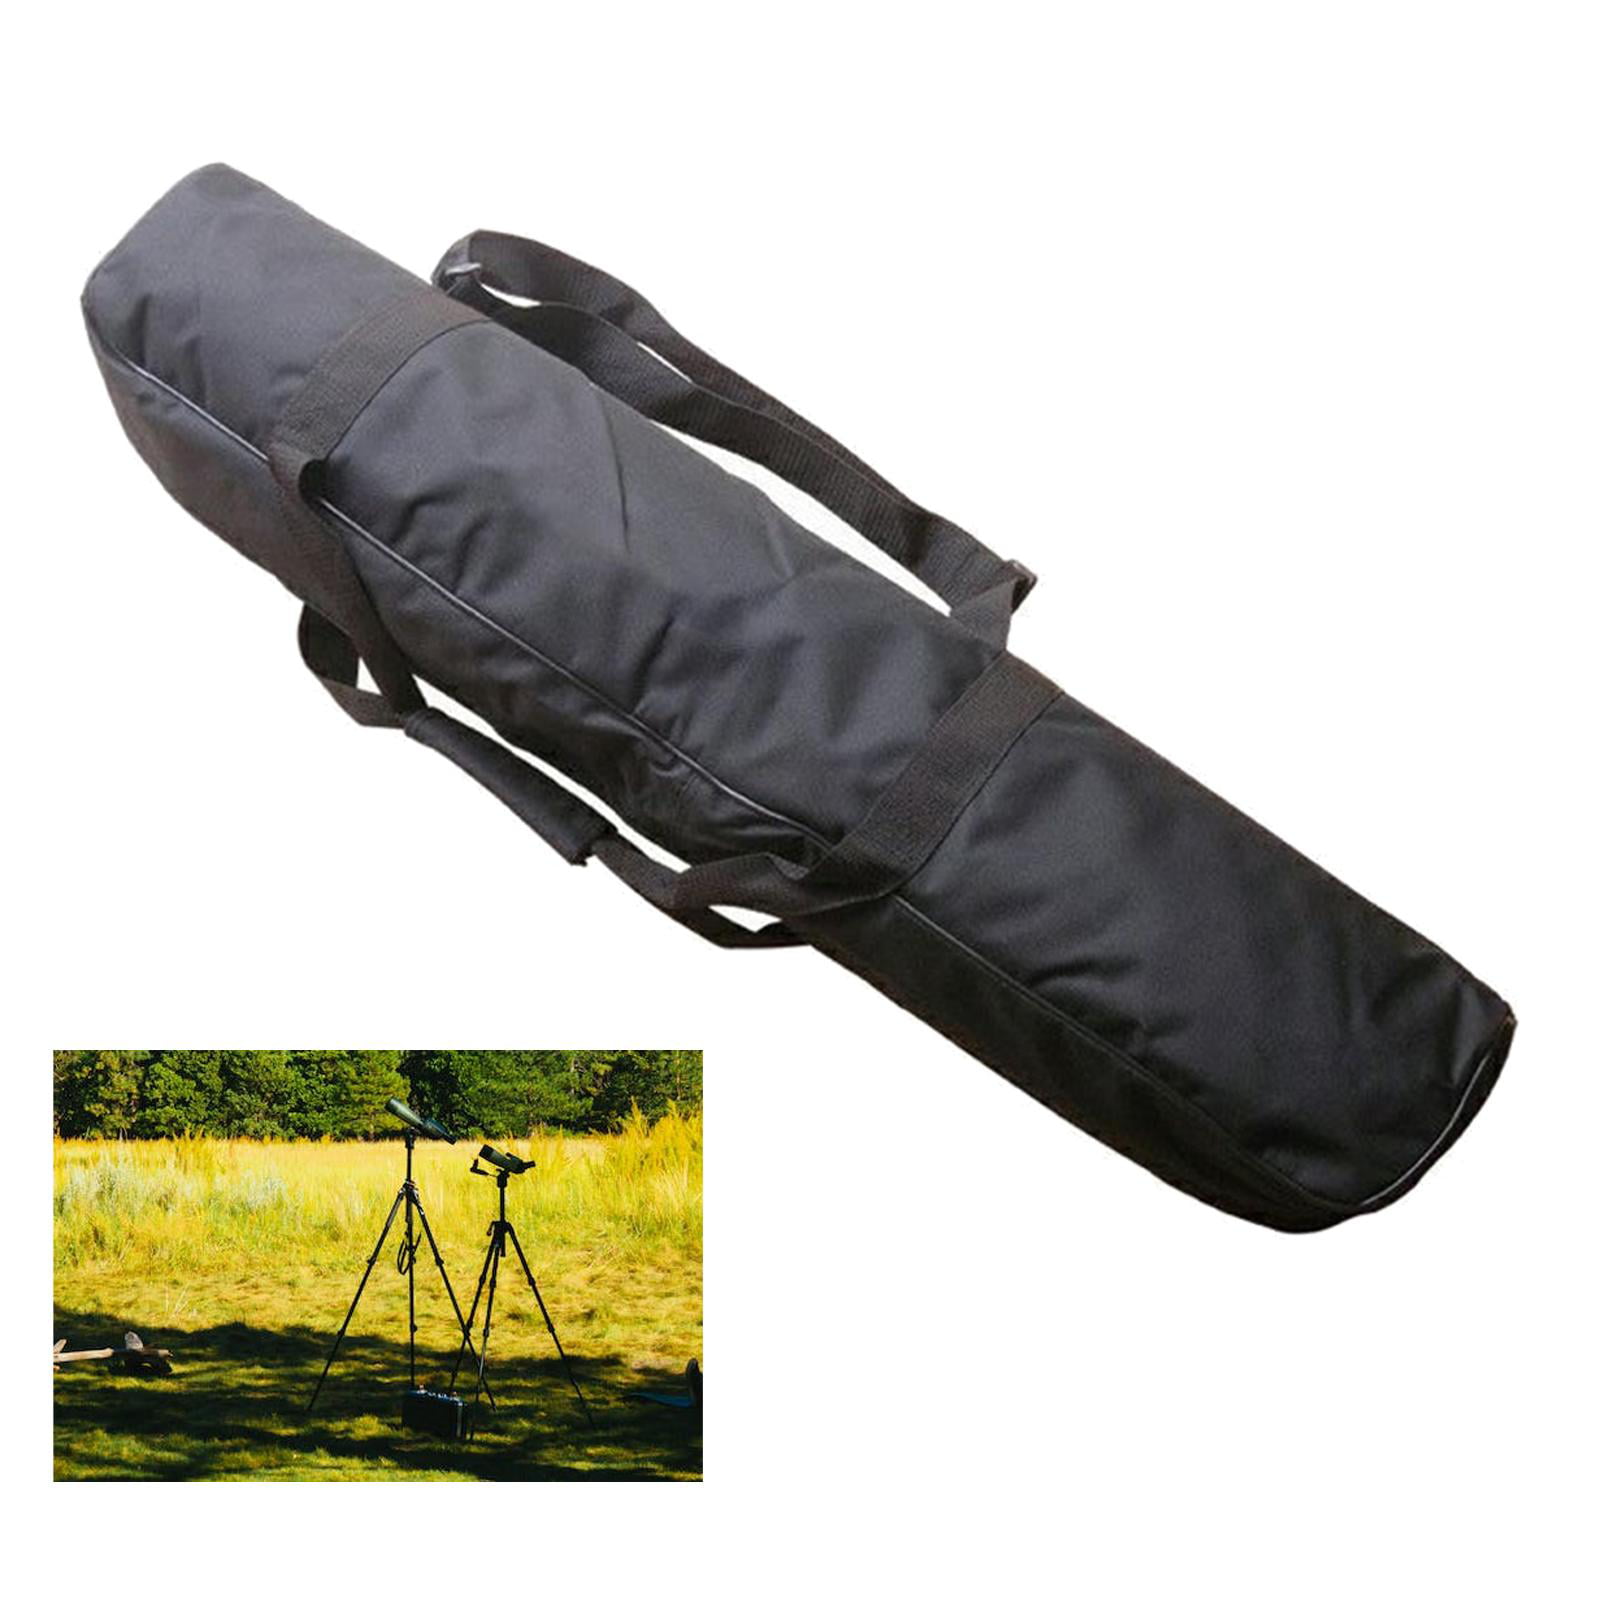 Tripod Bag in Noida at best price by Gaming Gears and Gadgets - Justdial